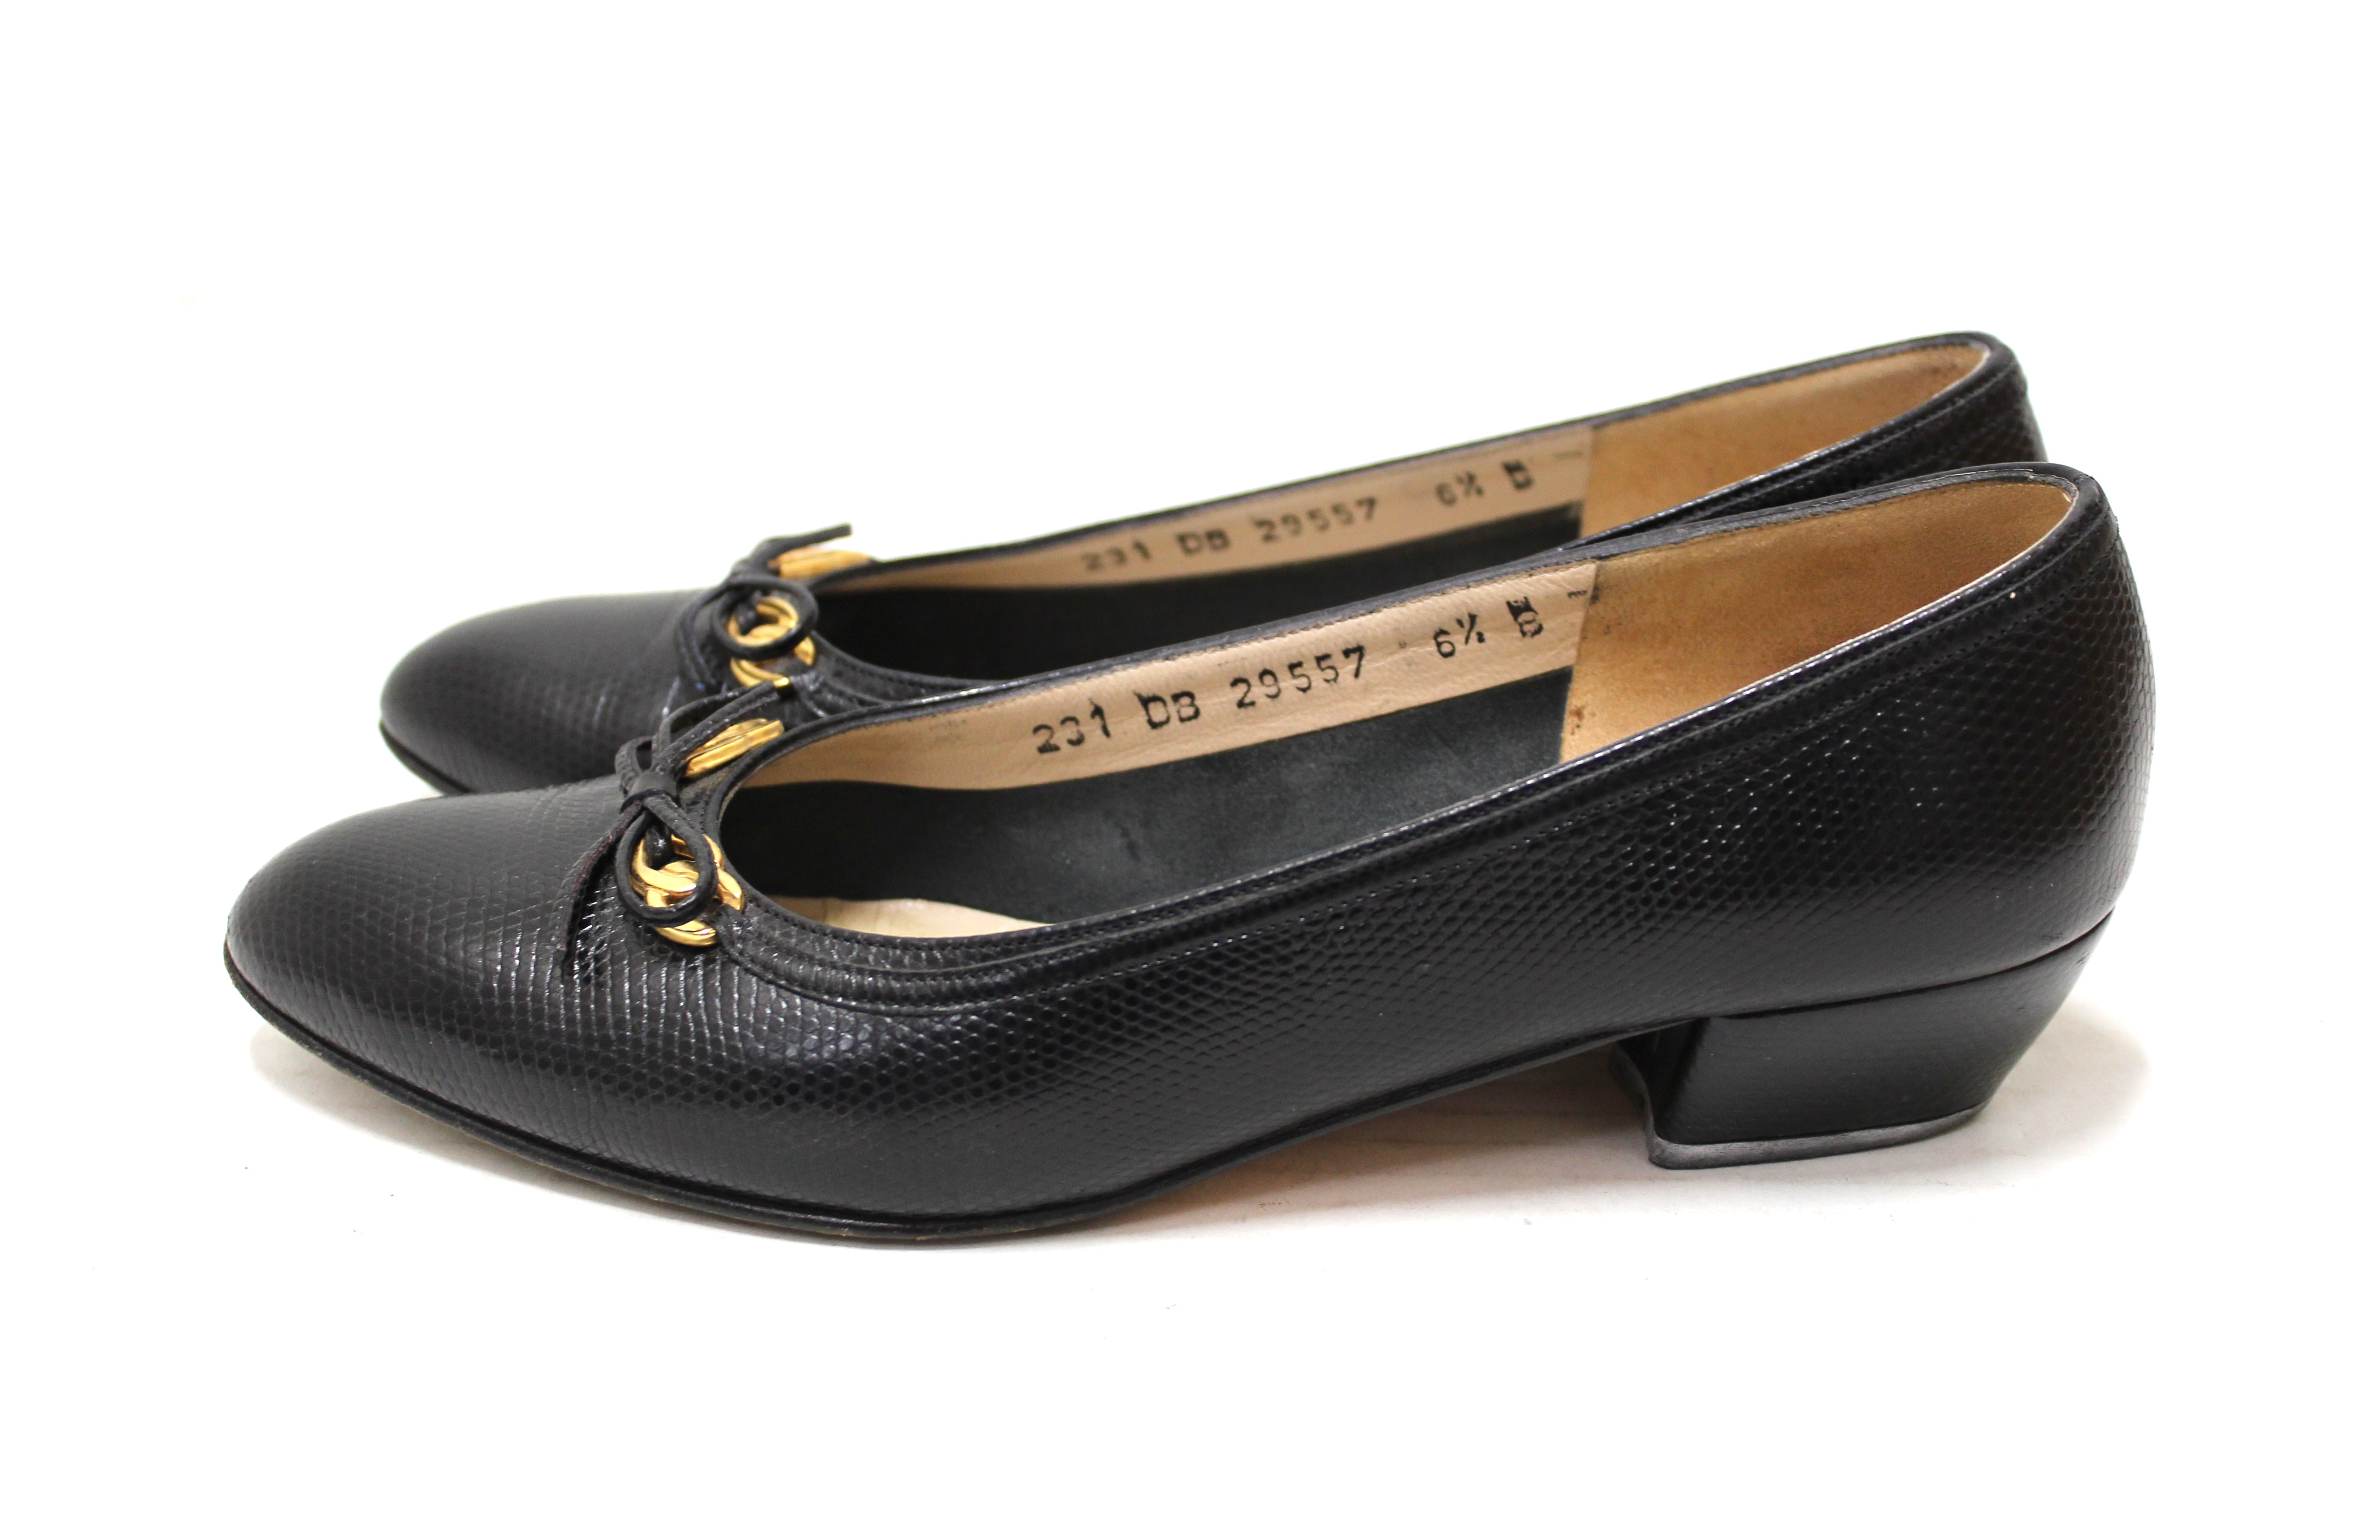 Salvatore Ferragamo Salvatore Ferragamo Slip-on pumps shoes leather Gray  Used Women logo size 9